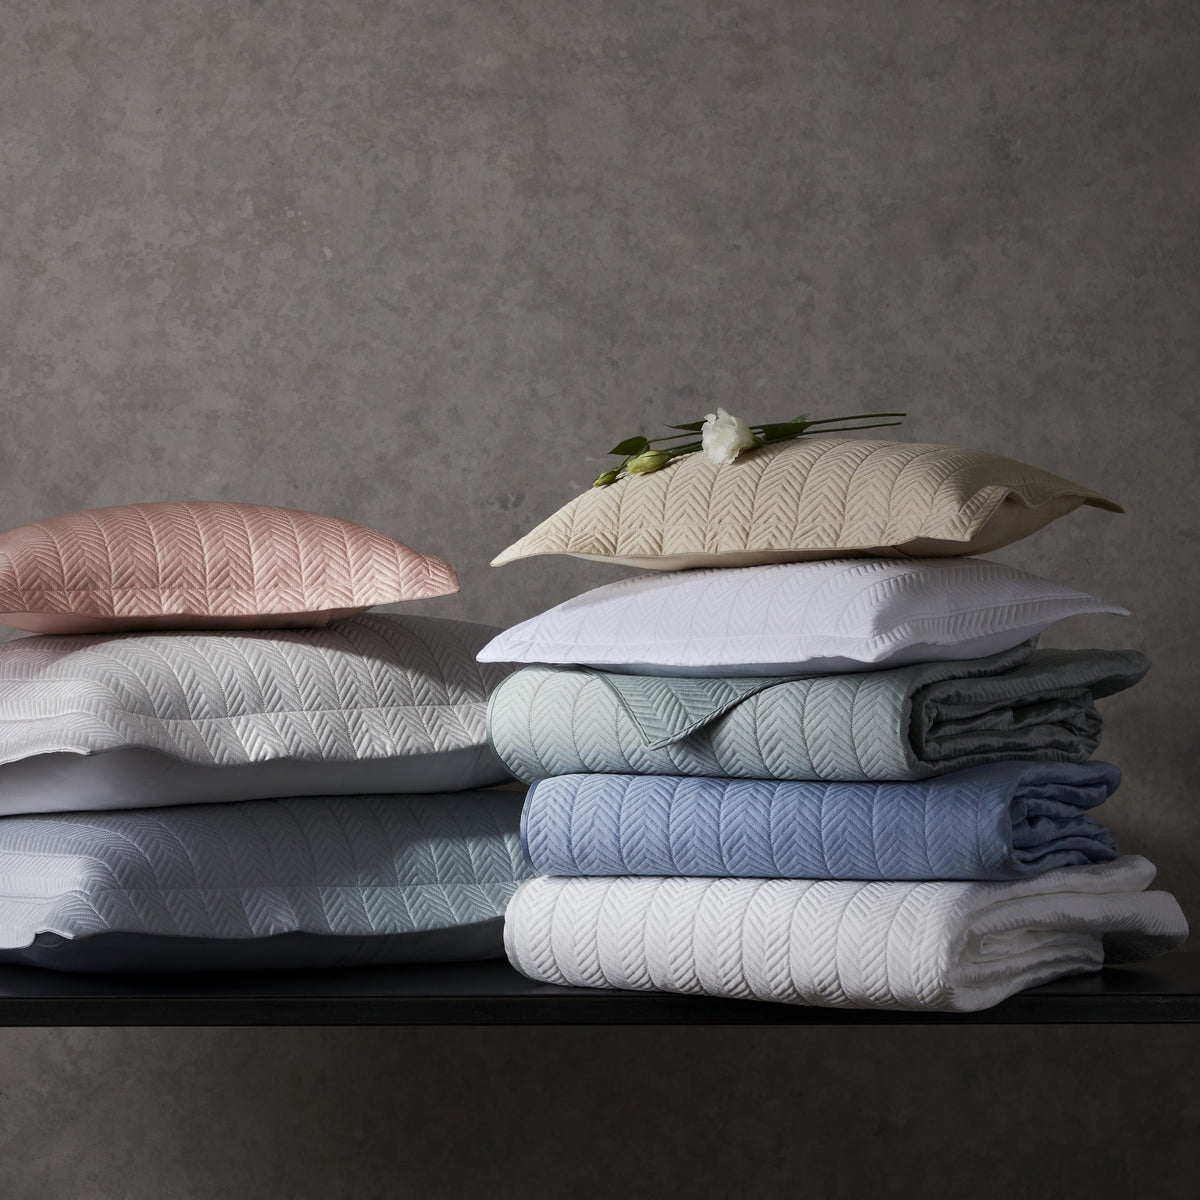 Lifestyle Shot of Stacks of Matouk Netto Bedding in Different Colors